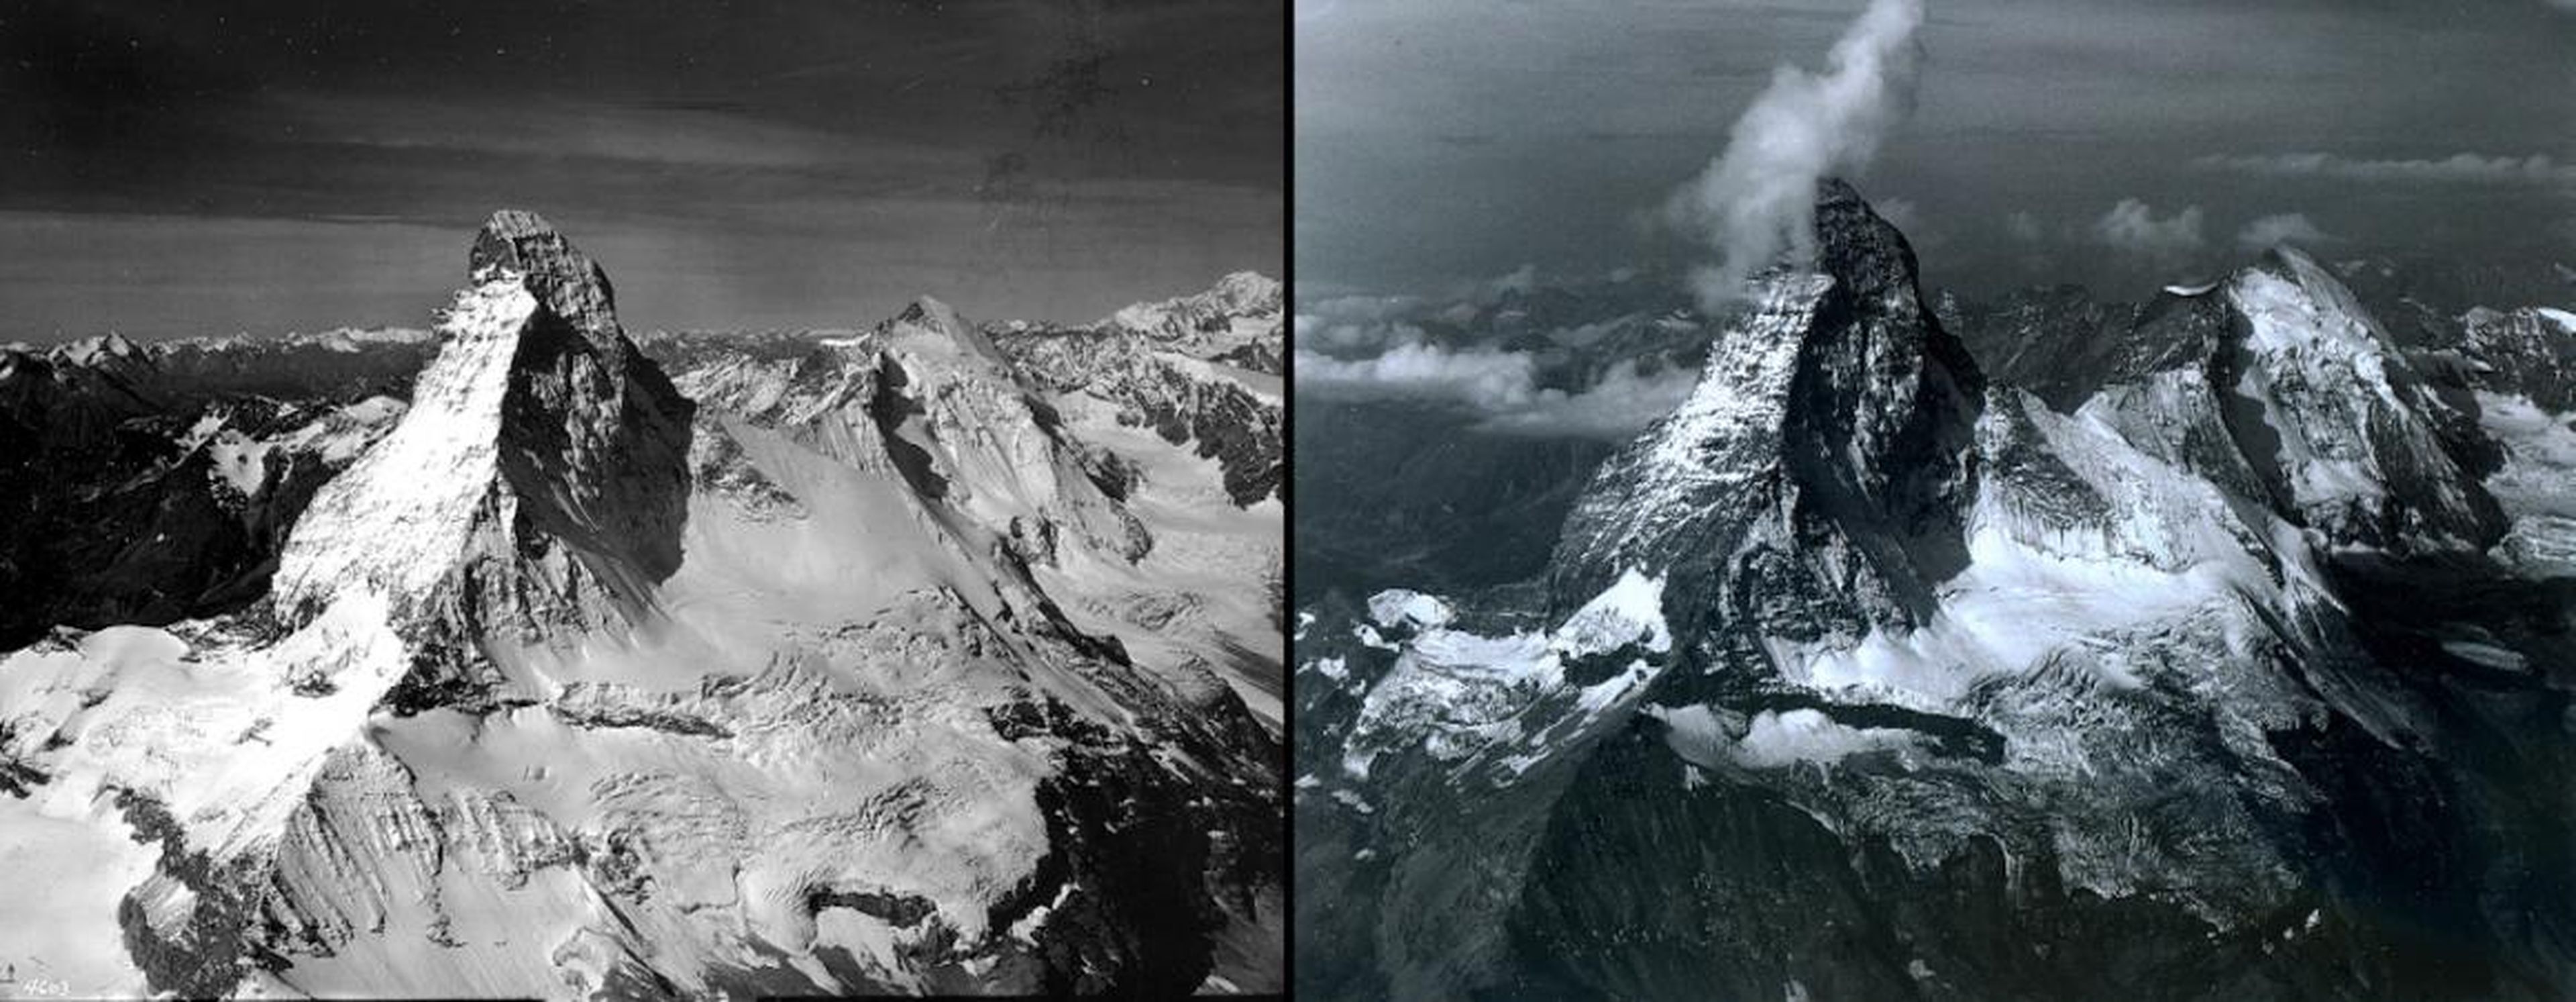 Elsewhere in Switzerland, the Matterhorn mountain in saw a marked drop in snowpack between August 1960 (left) and August 2005 (right).